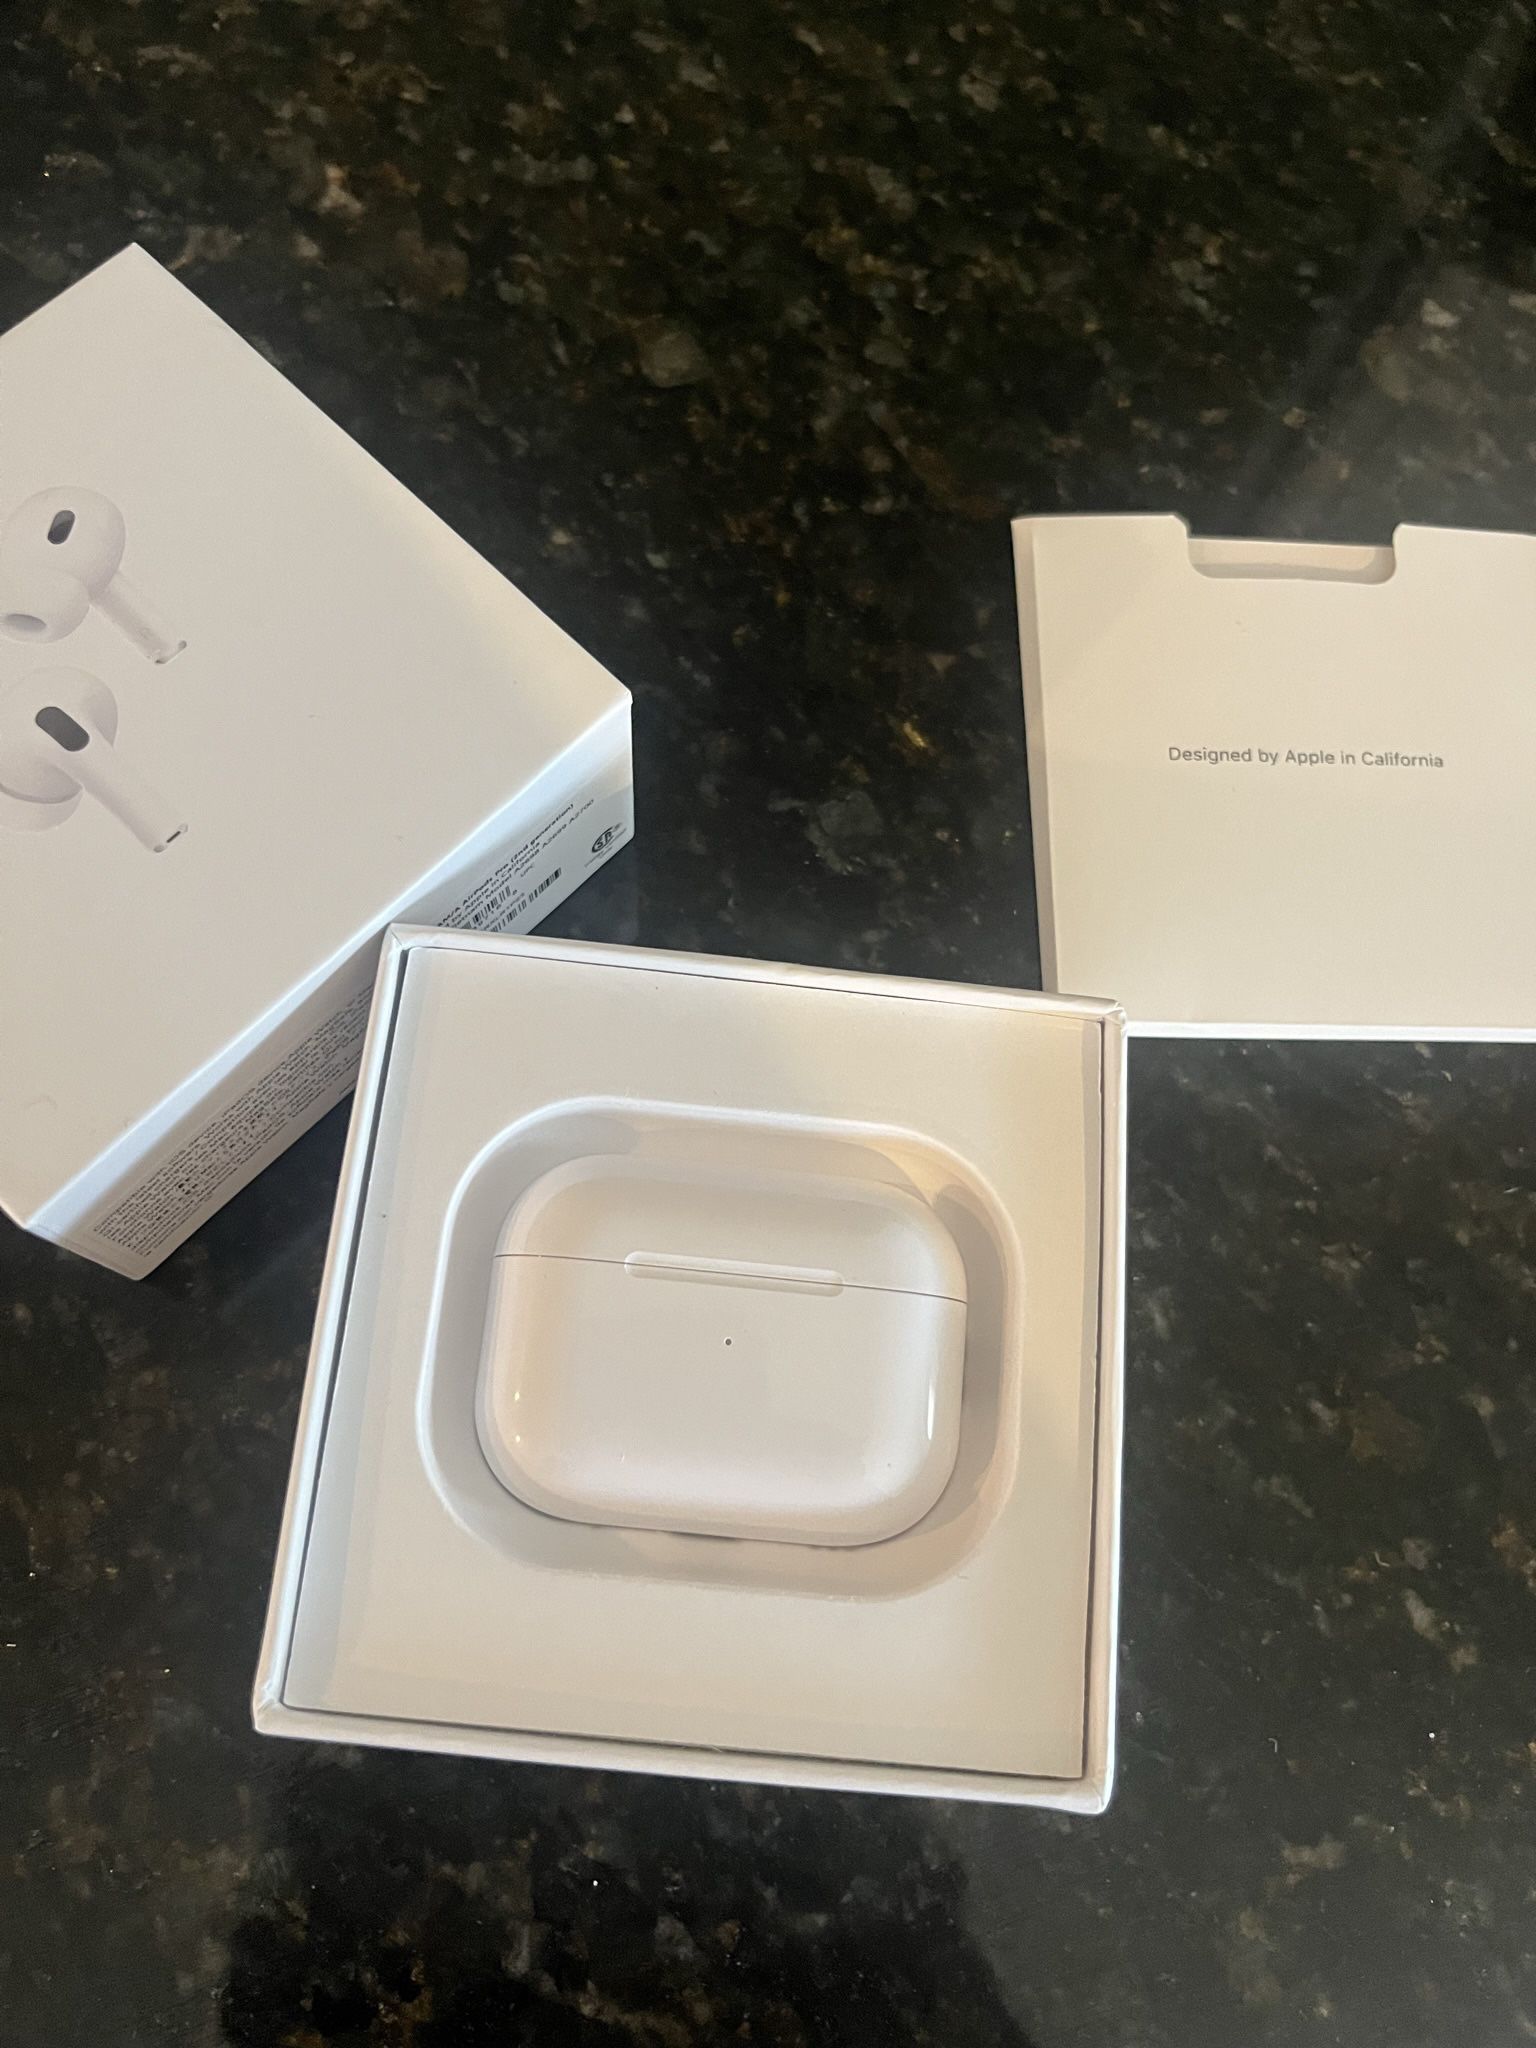 Airpod Pros 2nd Generation(Noise cancellation)